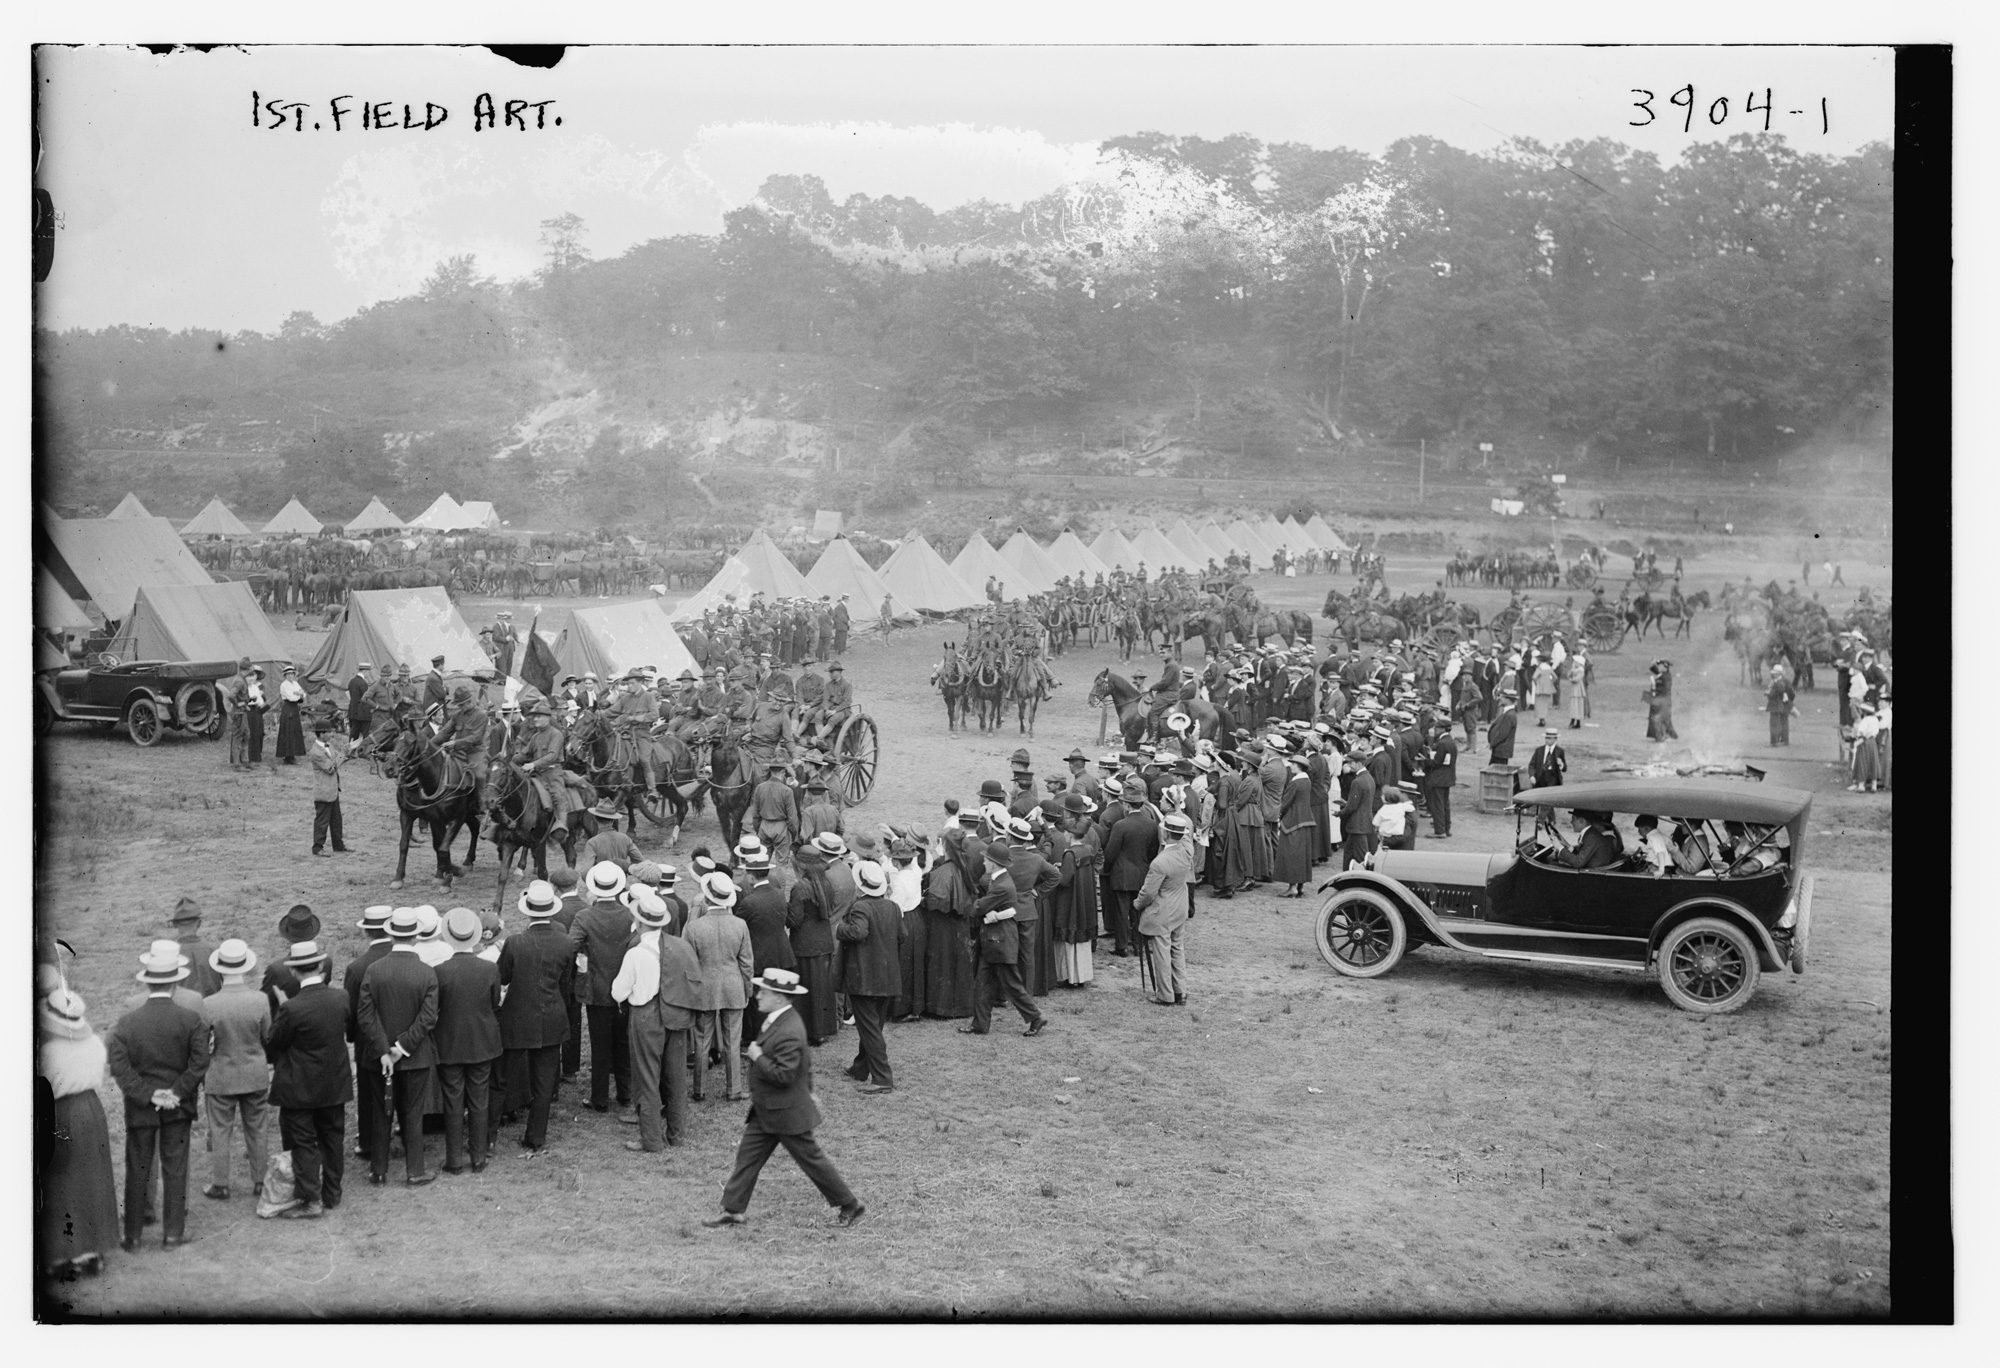 Photograph shows batteries of the 1st Field Artillery preparing to leave for Texas from their encampment at Van Cortlandt Park in New York, July 1916.